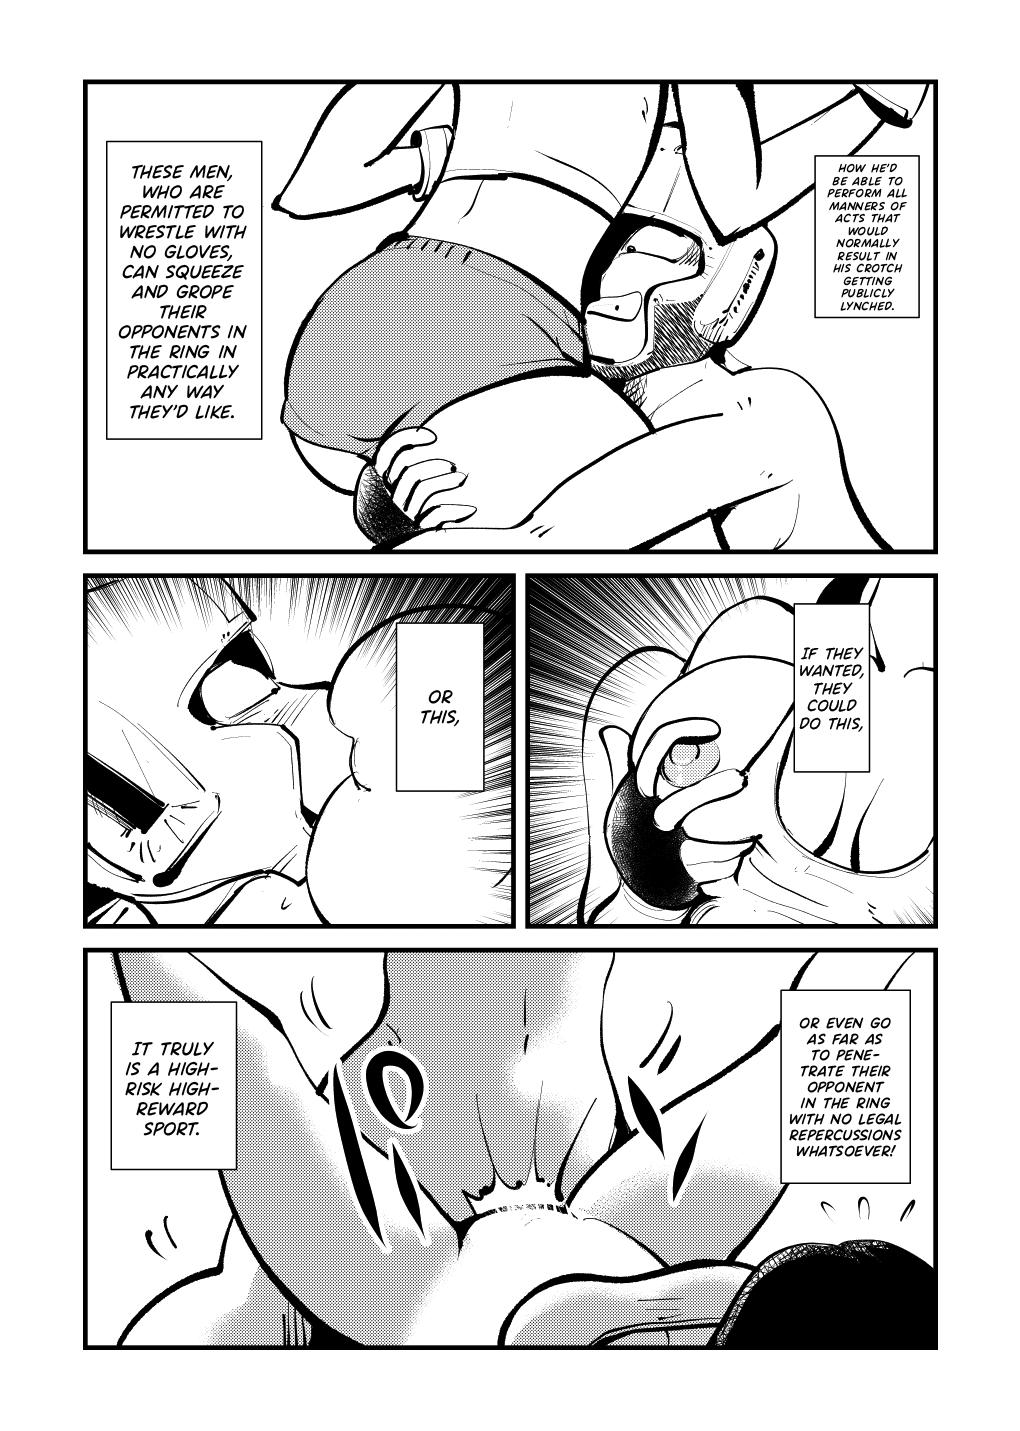 Spoon Dick Boxing Round Ass - Page 3